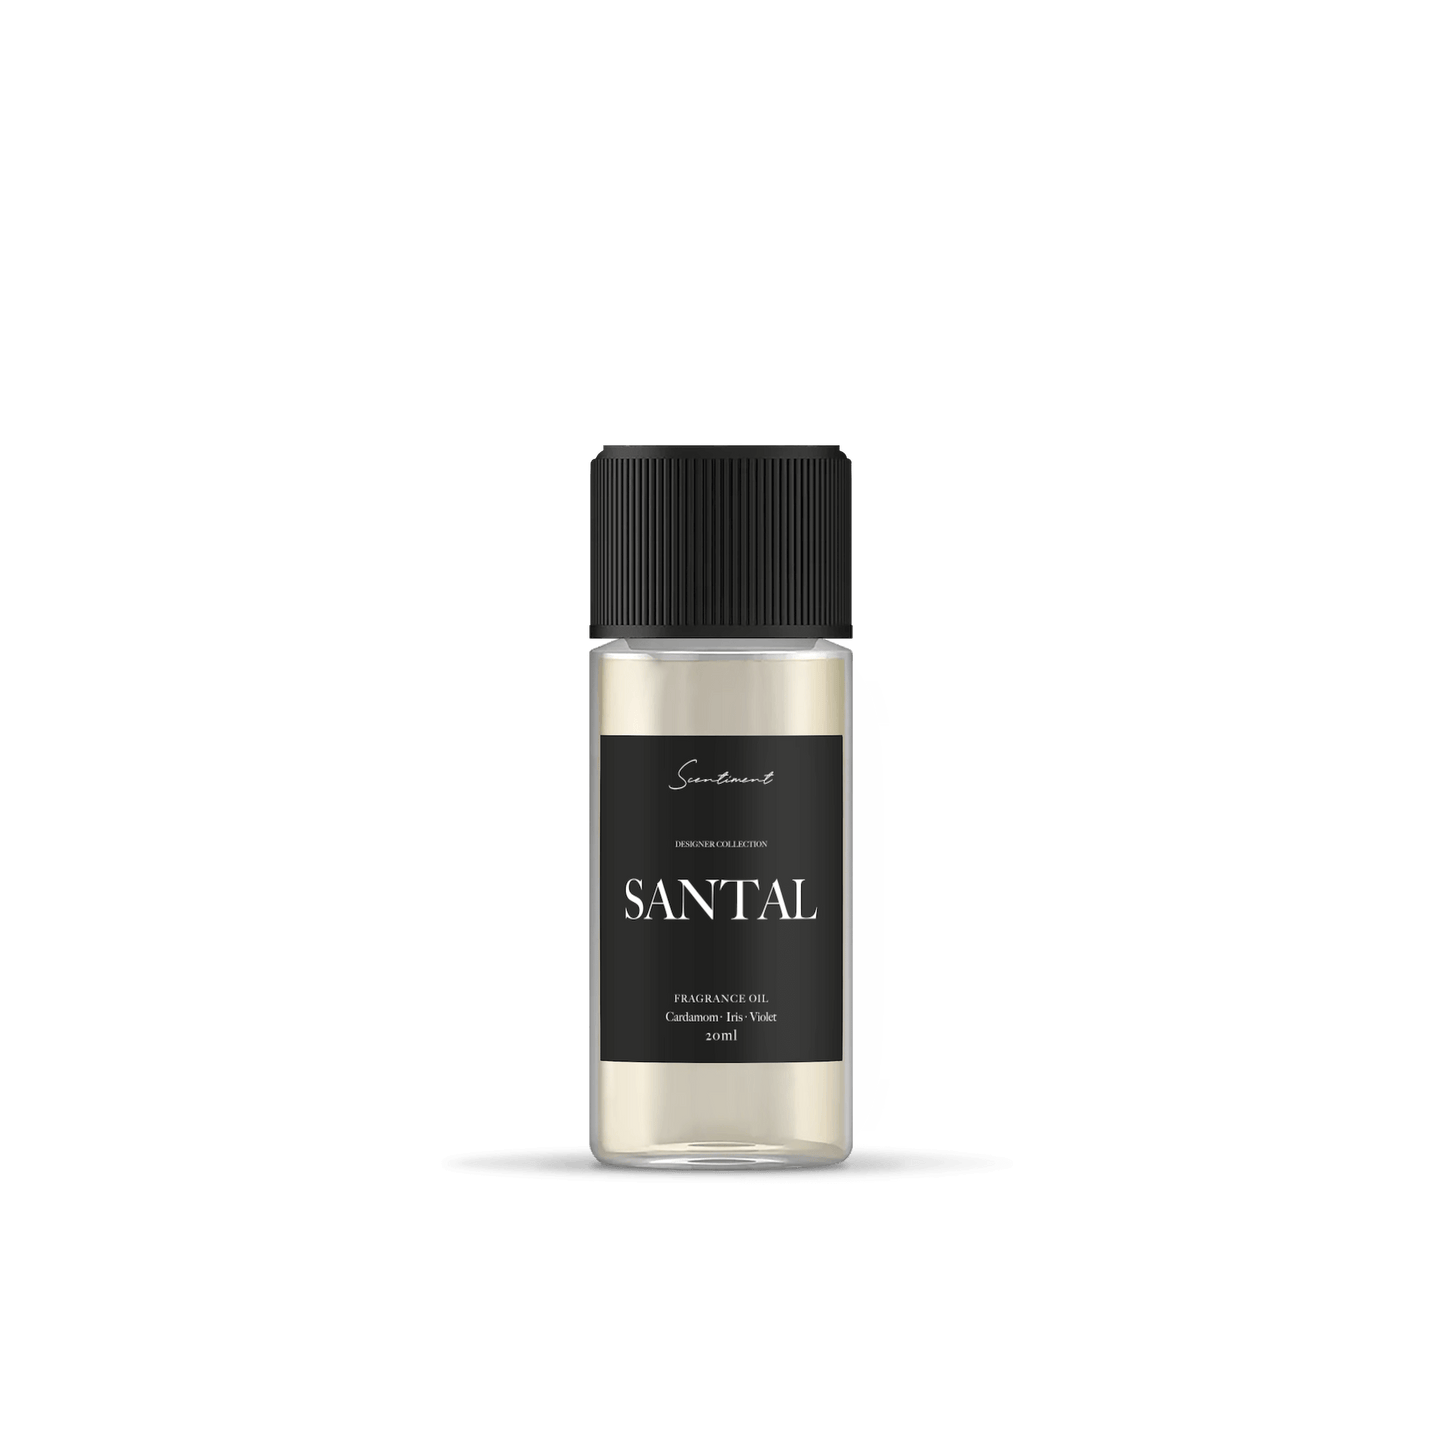 Santal, inspired by Santa 33®, with notes of Cardamom, Iris and Violet.